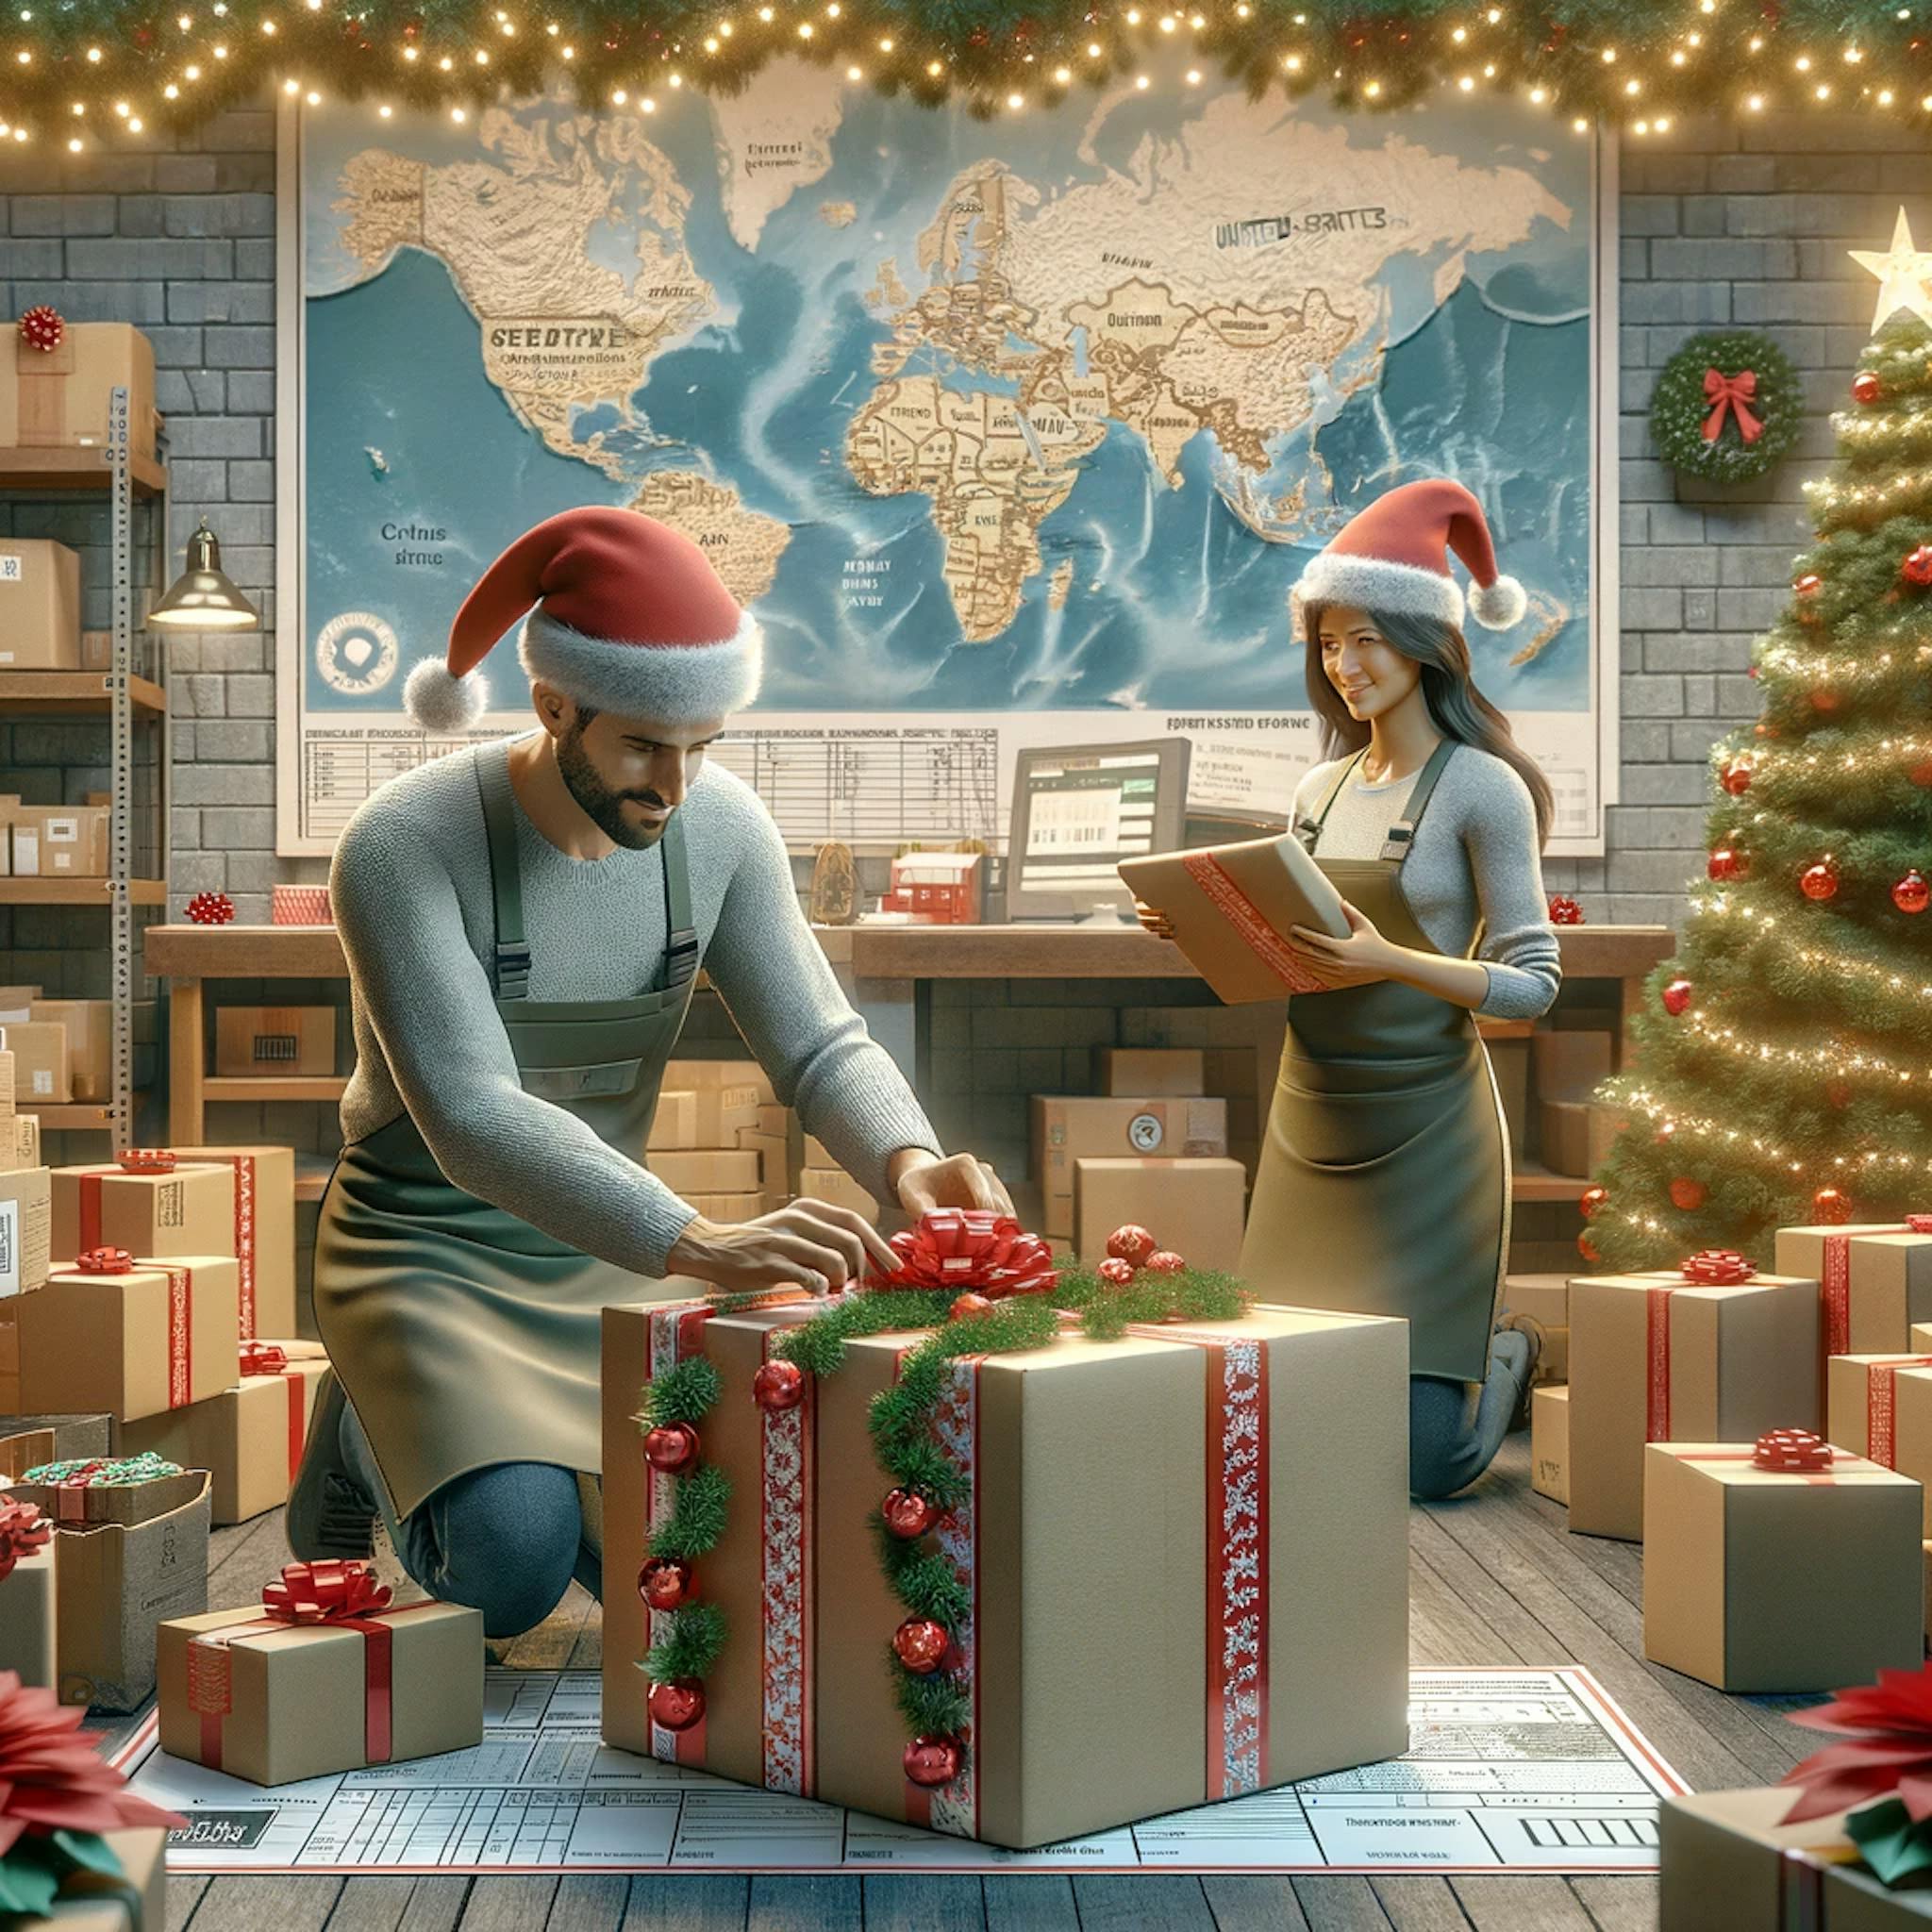 a package being prepared for international shipping from the United States, set in a Christmas-themed shipping office